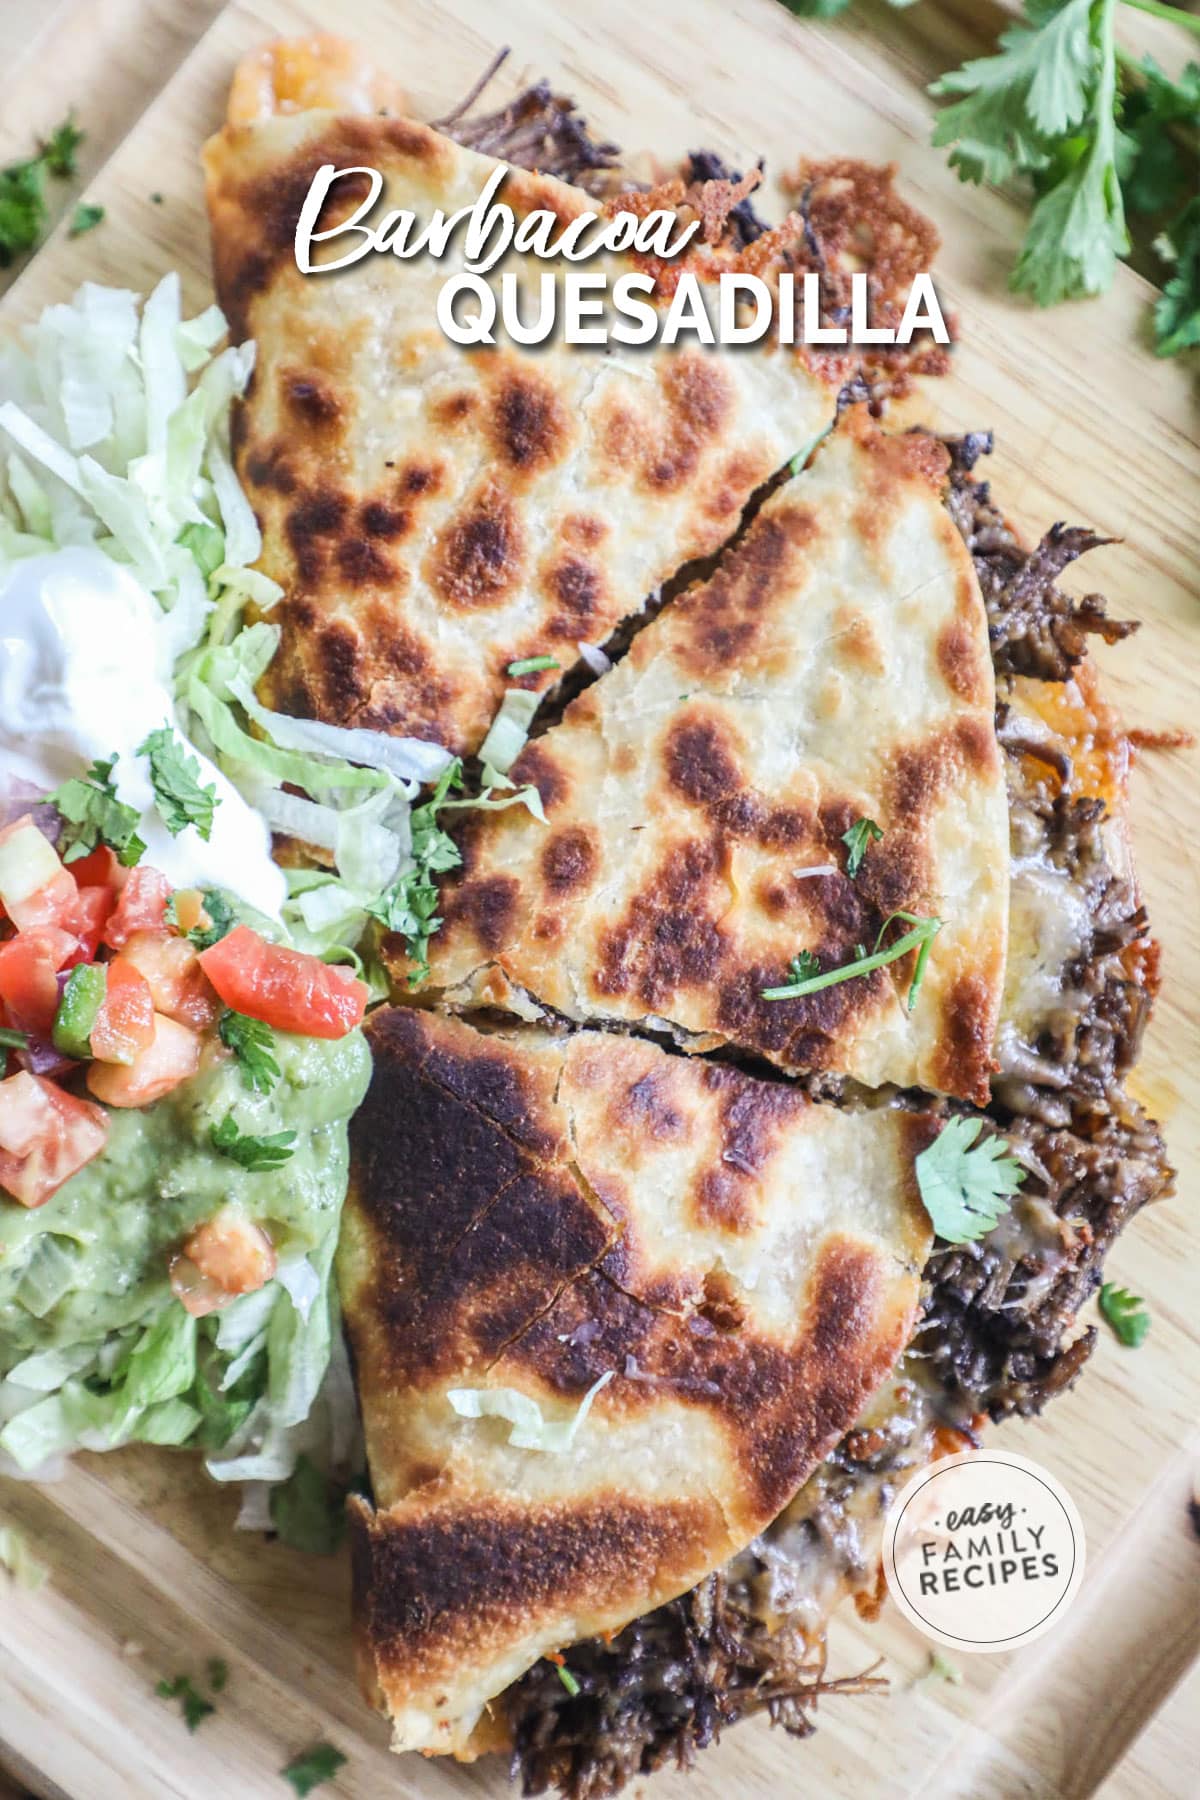 Barbacoa quesadilla that is golden brown and topped with guacamole, pico, and shredded lettuce.